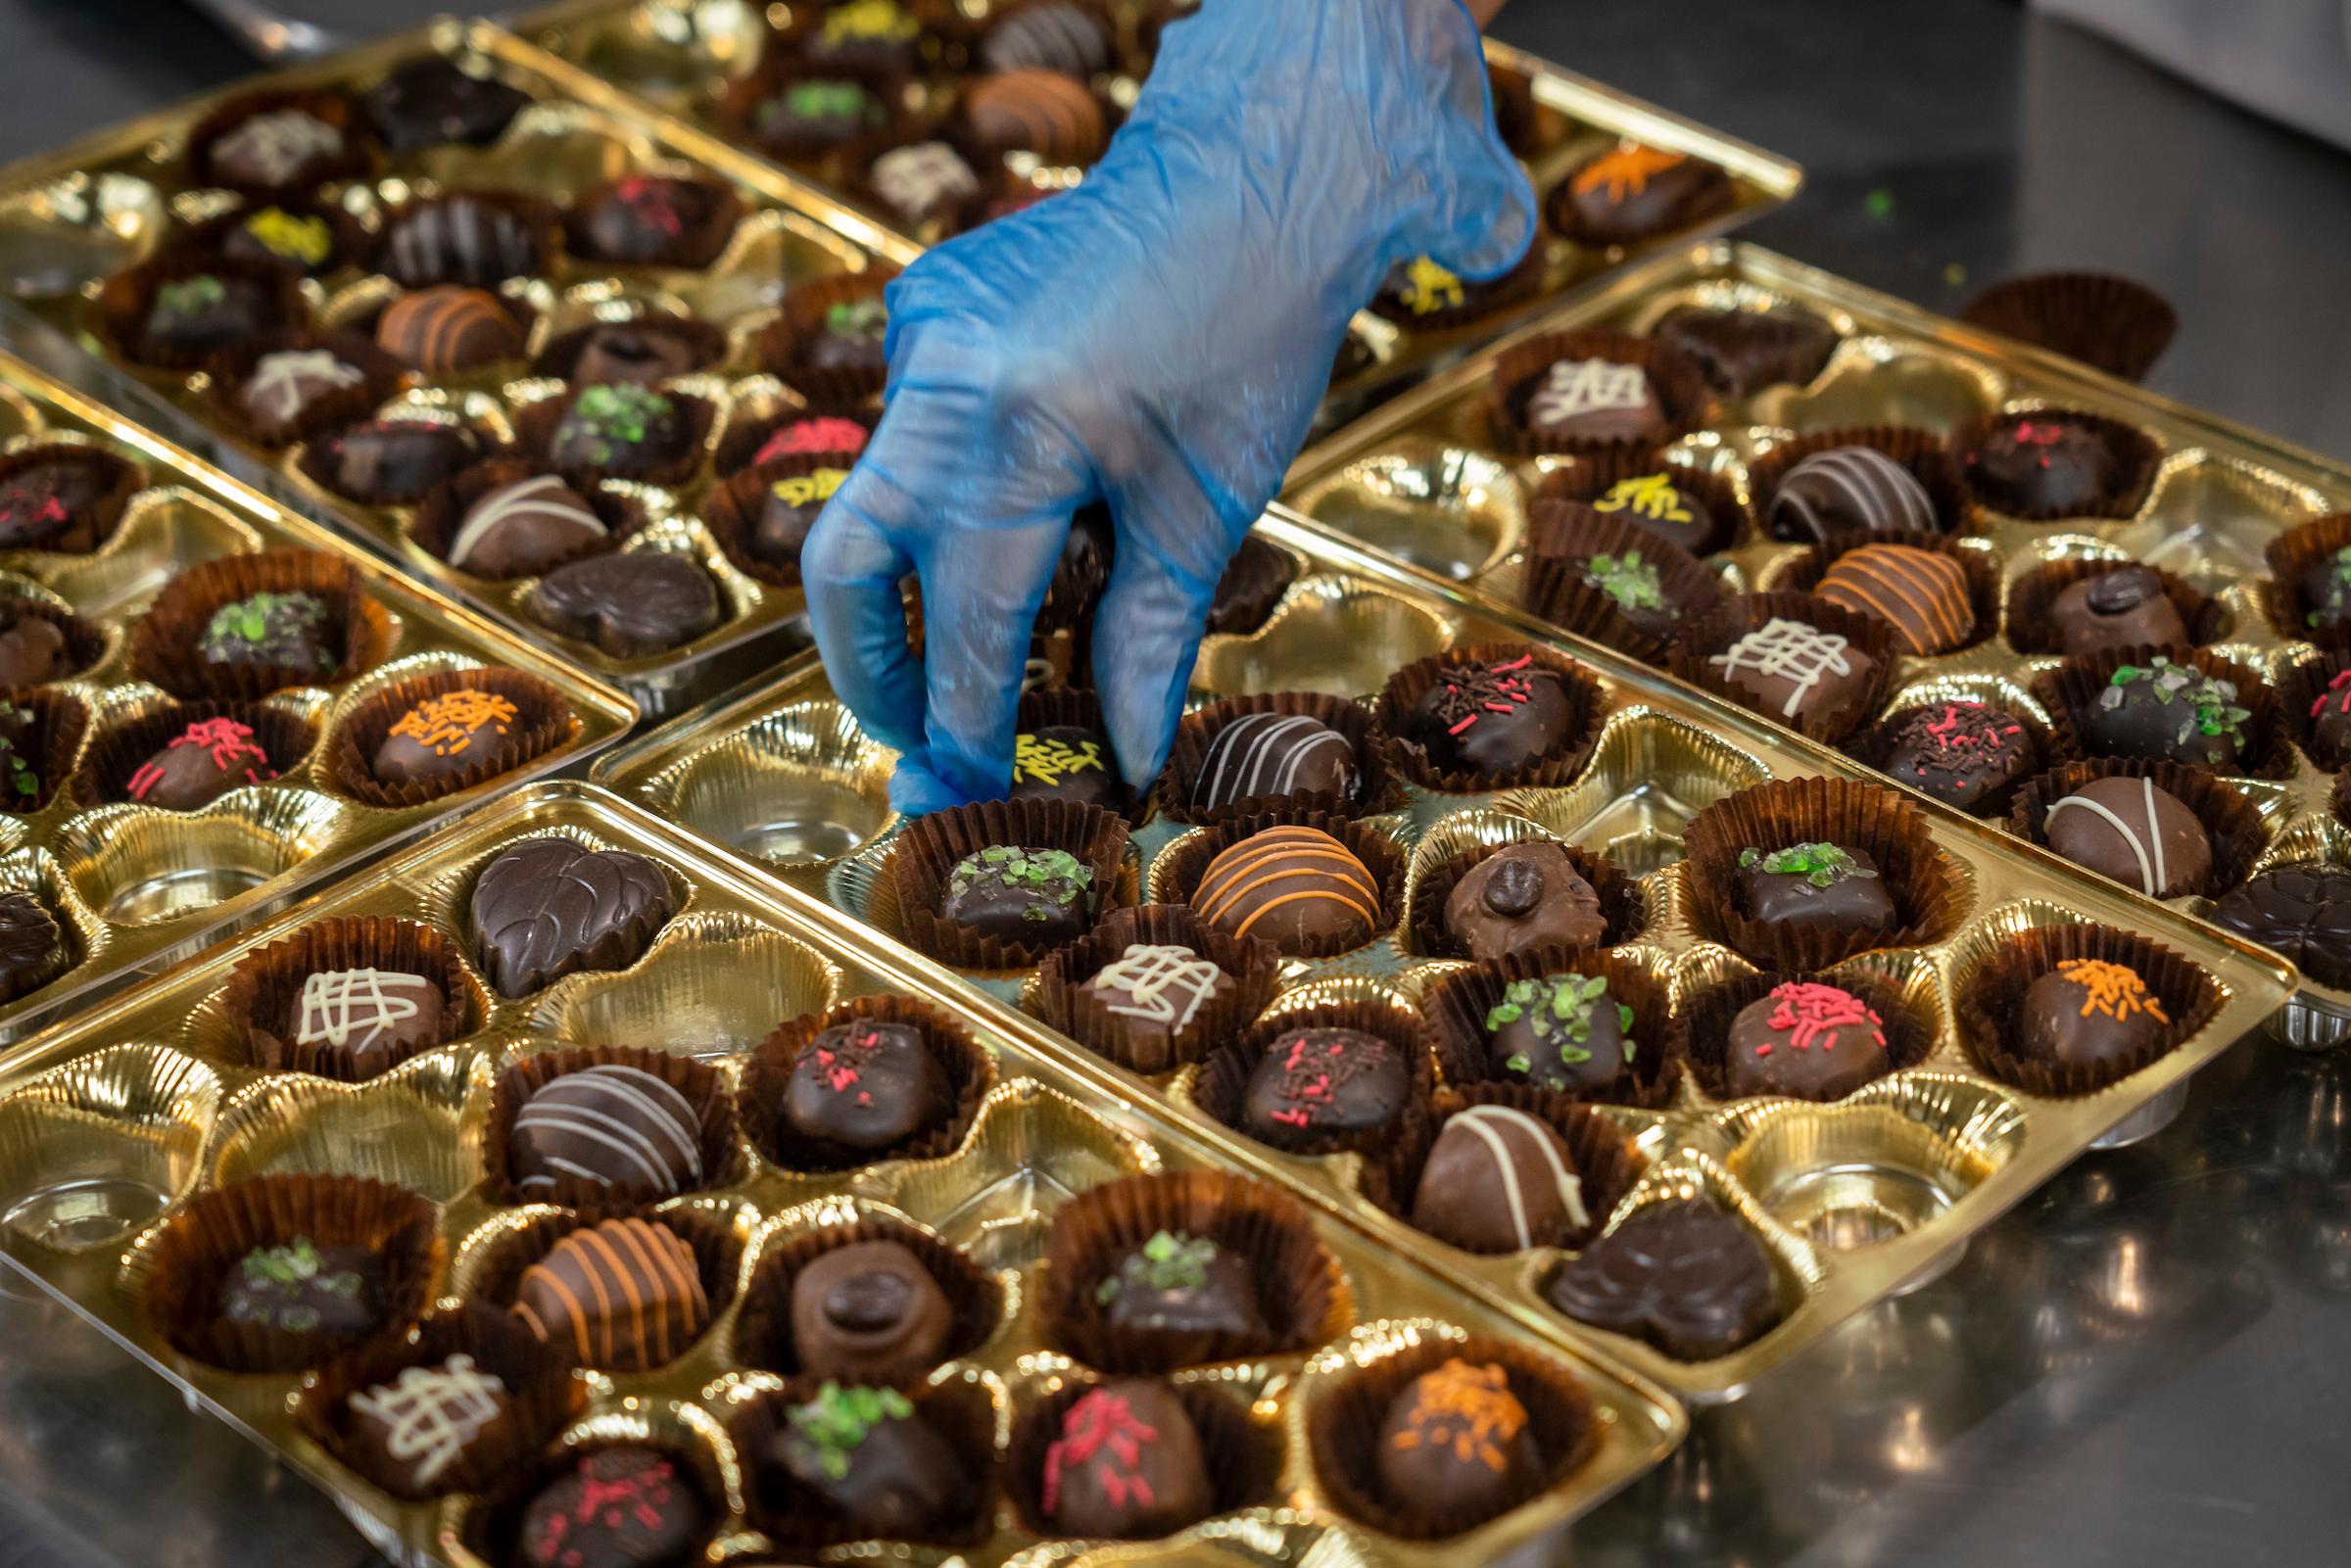 Davies Chocolates worker placing chocolate in tray with gloves